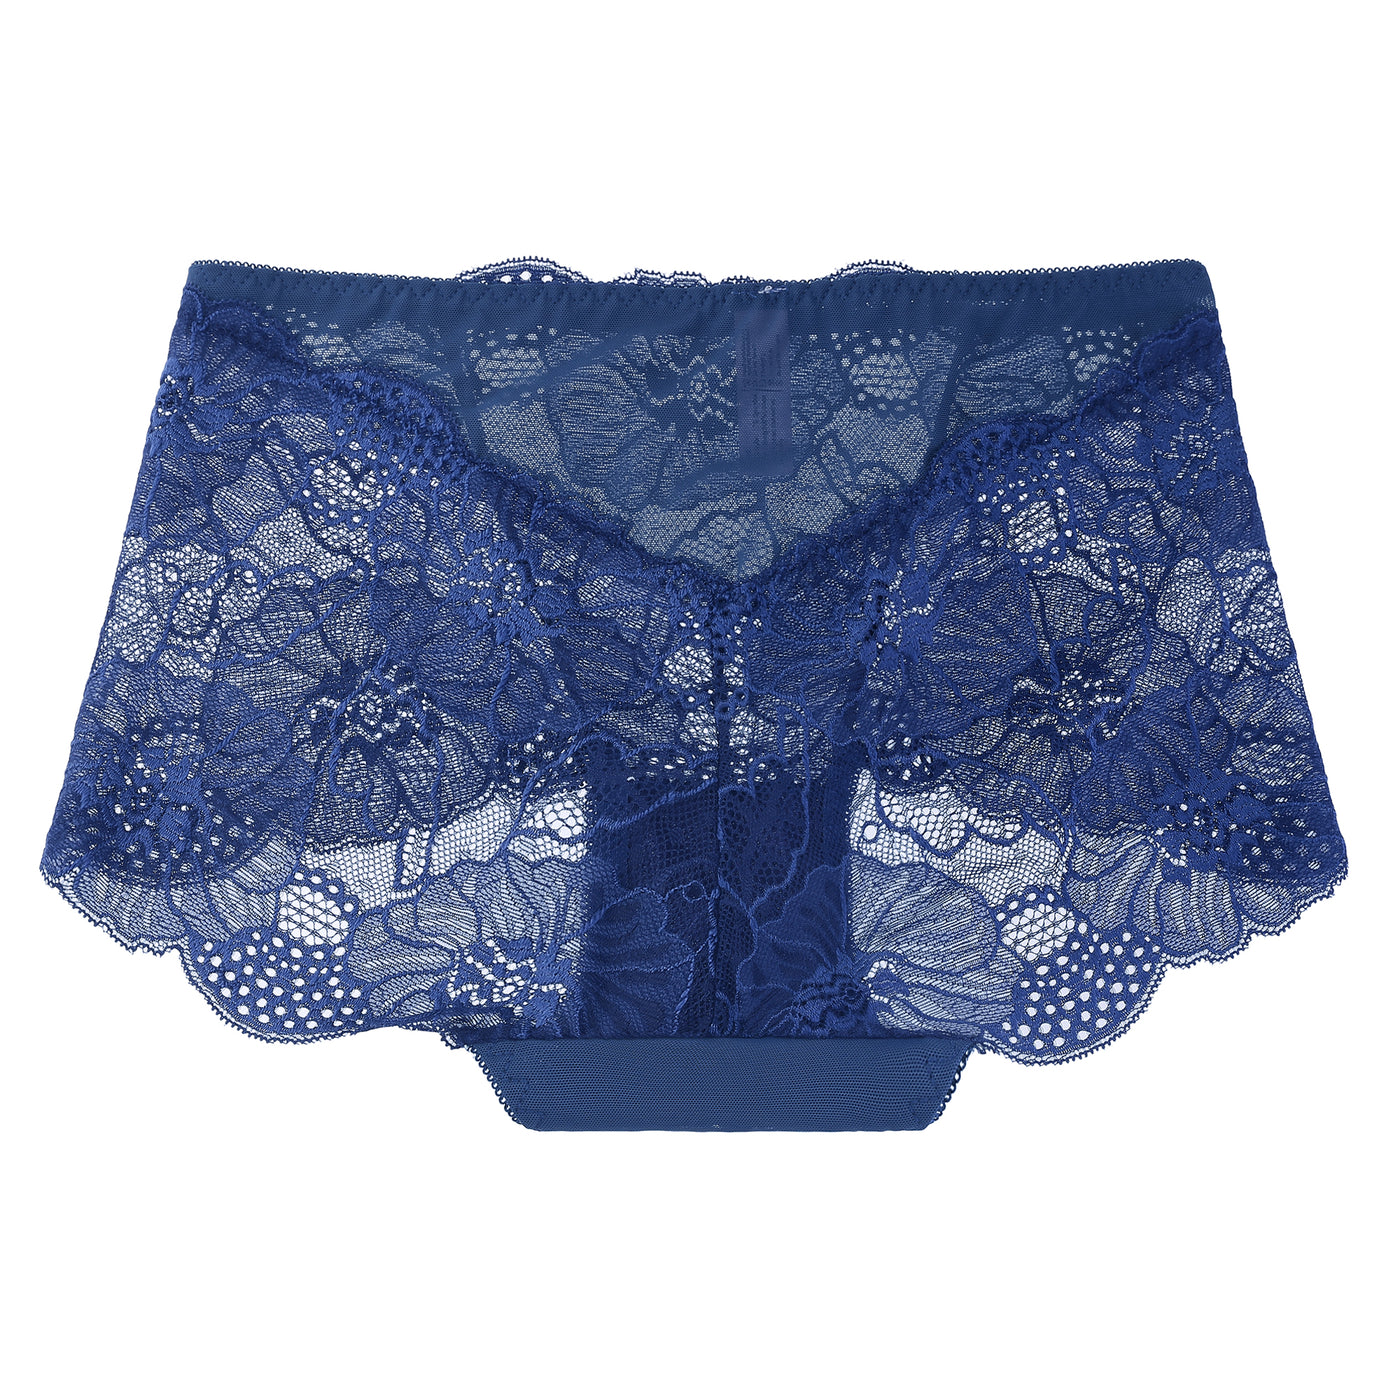 Bublédon Panties for Women Sexy Lace Floral Underwear Briefs Hipster Panty